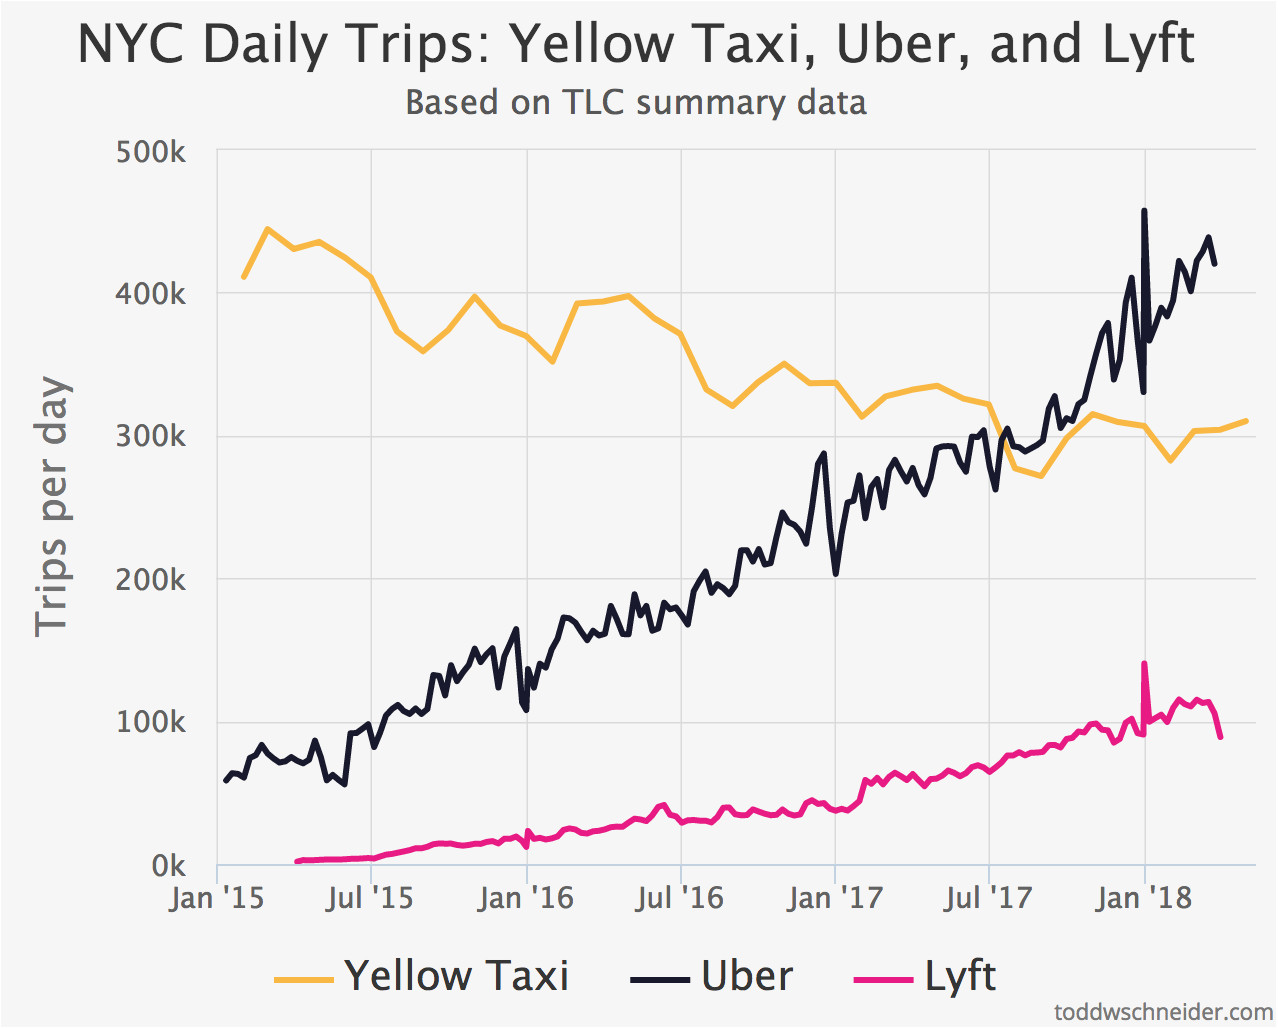 this graph will continue to update as the tlc releases additional data but at the time i wrote this in april 2016 the most recent data shows yellow taxis